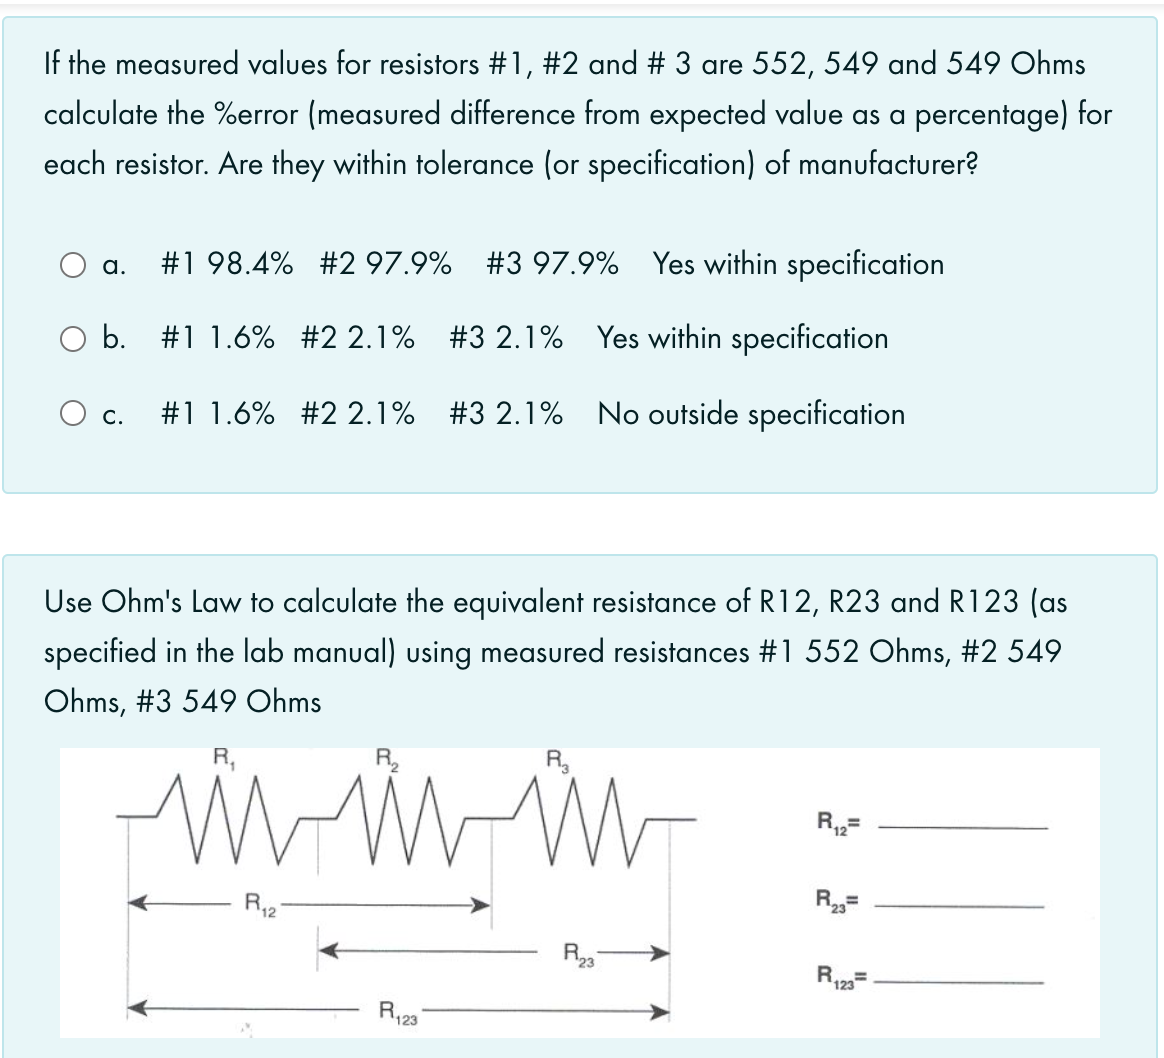 If the measured values for resistors #1, #2 and # 3 are 552, 549 and 549 Ohms
calculate the %error (measured difference from expected value as a percentage) for
each resistor. Are they within tolerance (or specification) of manufacturer?
#1 98.4% #2 97.9% #3 97.9% Yes within specification
a.
b. #1 1.6% #2 2.1% #3 2.1% Yes within specification
#1 1.6% #2 2.1% #3 2.1% No outside specification
Ос.
Use Ohm's Law to calculate the equivalent resistance of R12, R23 and R123 (as
specified in the lab manual) using measured resistances #1 552 Ohms, #2 549
Ohms, #3 549 Ohms
R,
R2
R,=
R12
R23
